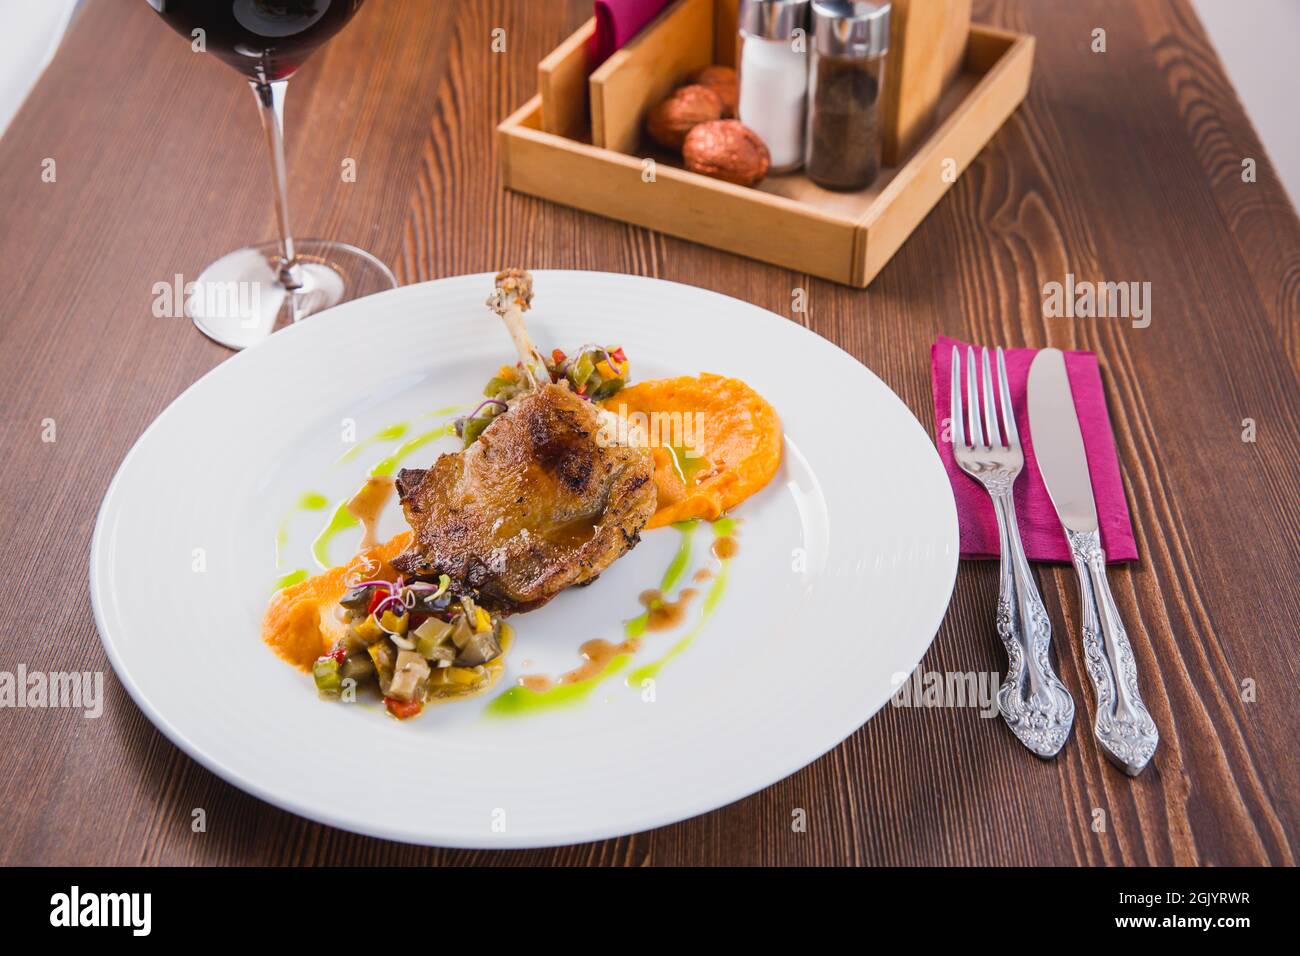 Duck leg confit, served on a pillow of pumpkin puree and salad as a delicious meat food dish for dinner. Served with red wine Stock Photo